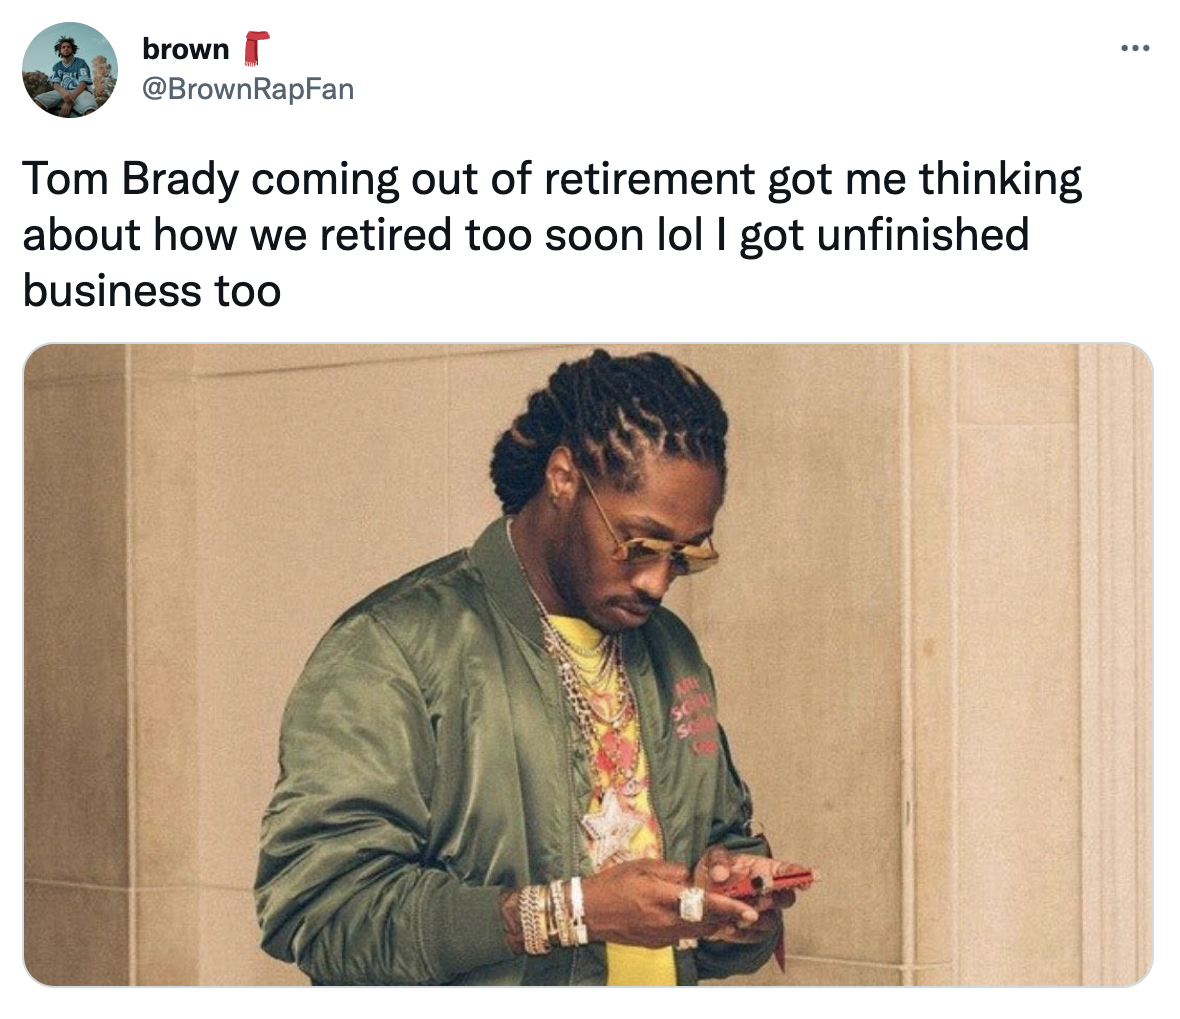 Tom Brady un-retirement memesfuture meme texting - brown RapFan Tom Brady coming out of retirement got me thinking about how we retired too soon lol I got unfinished business too